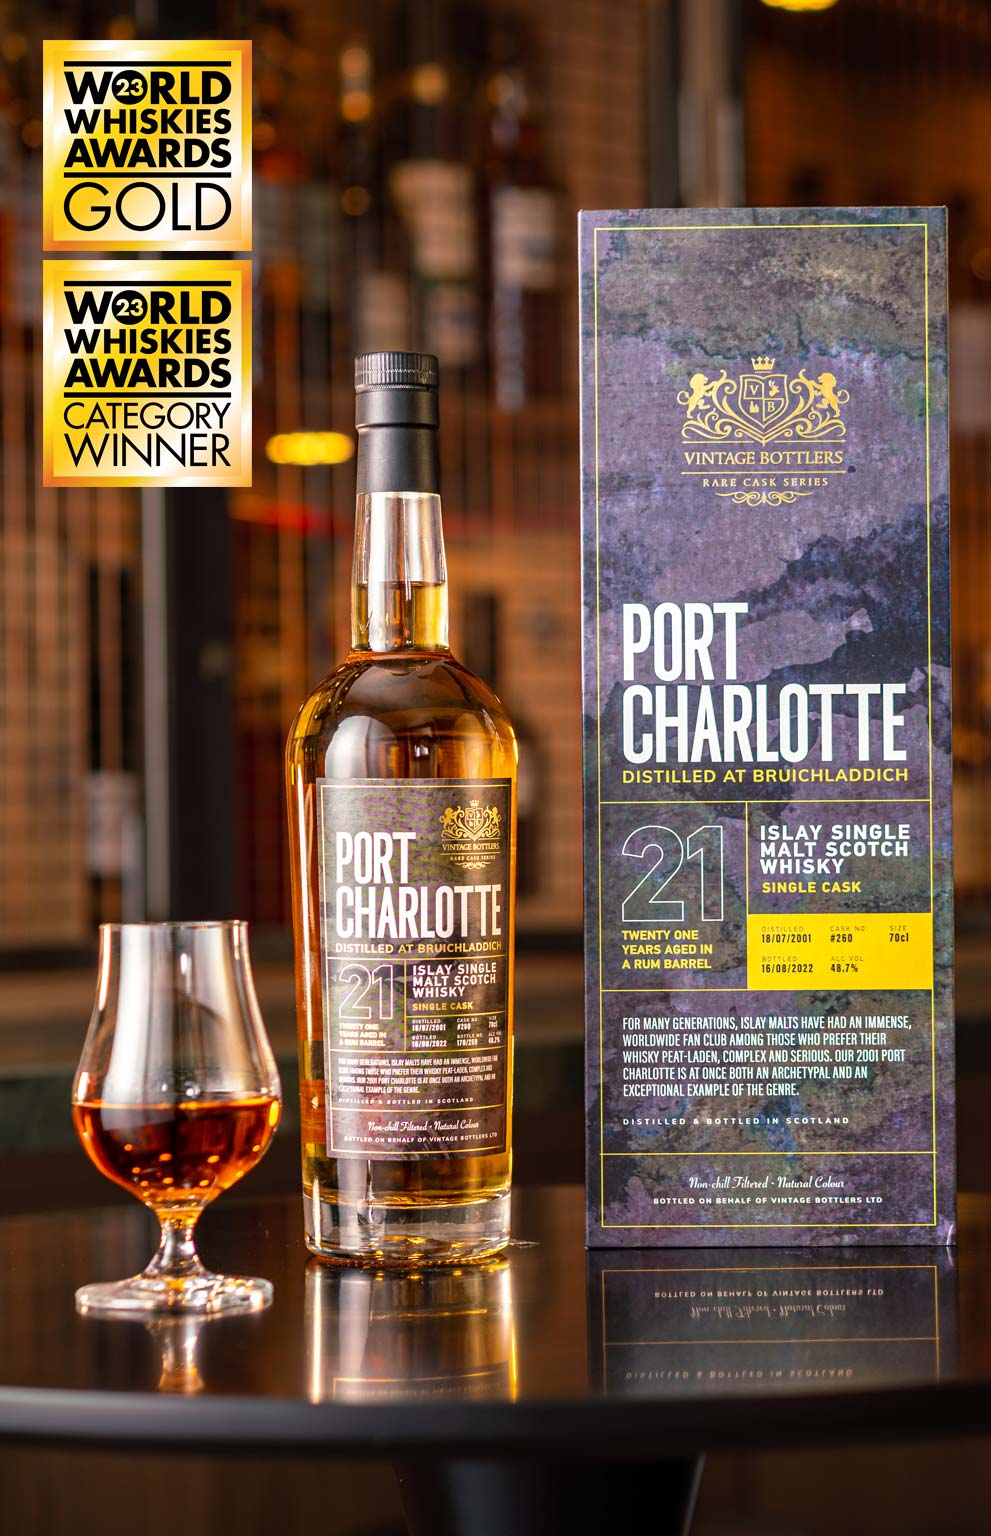 Port Charlotte 21 Year Old